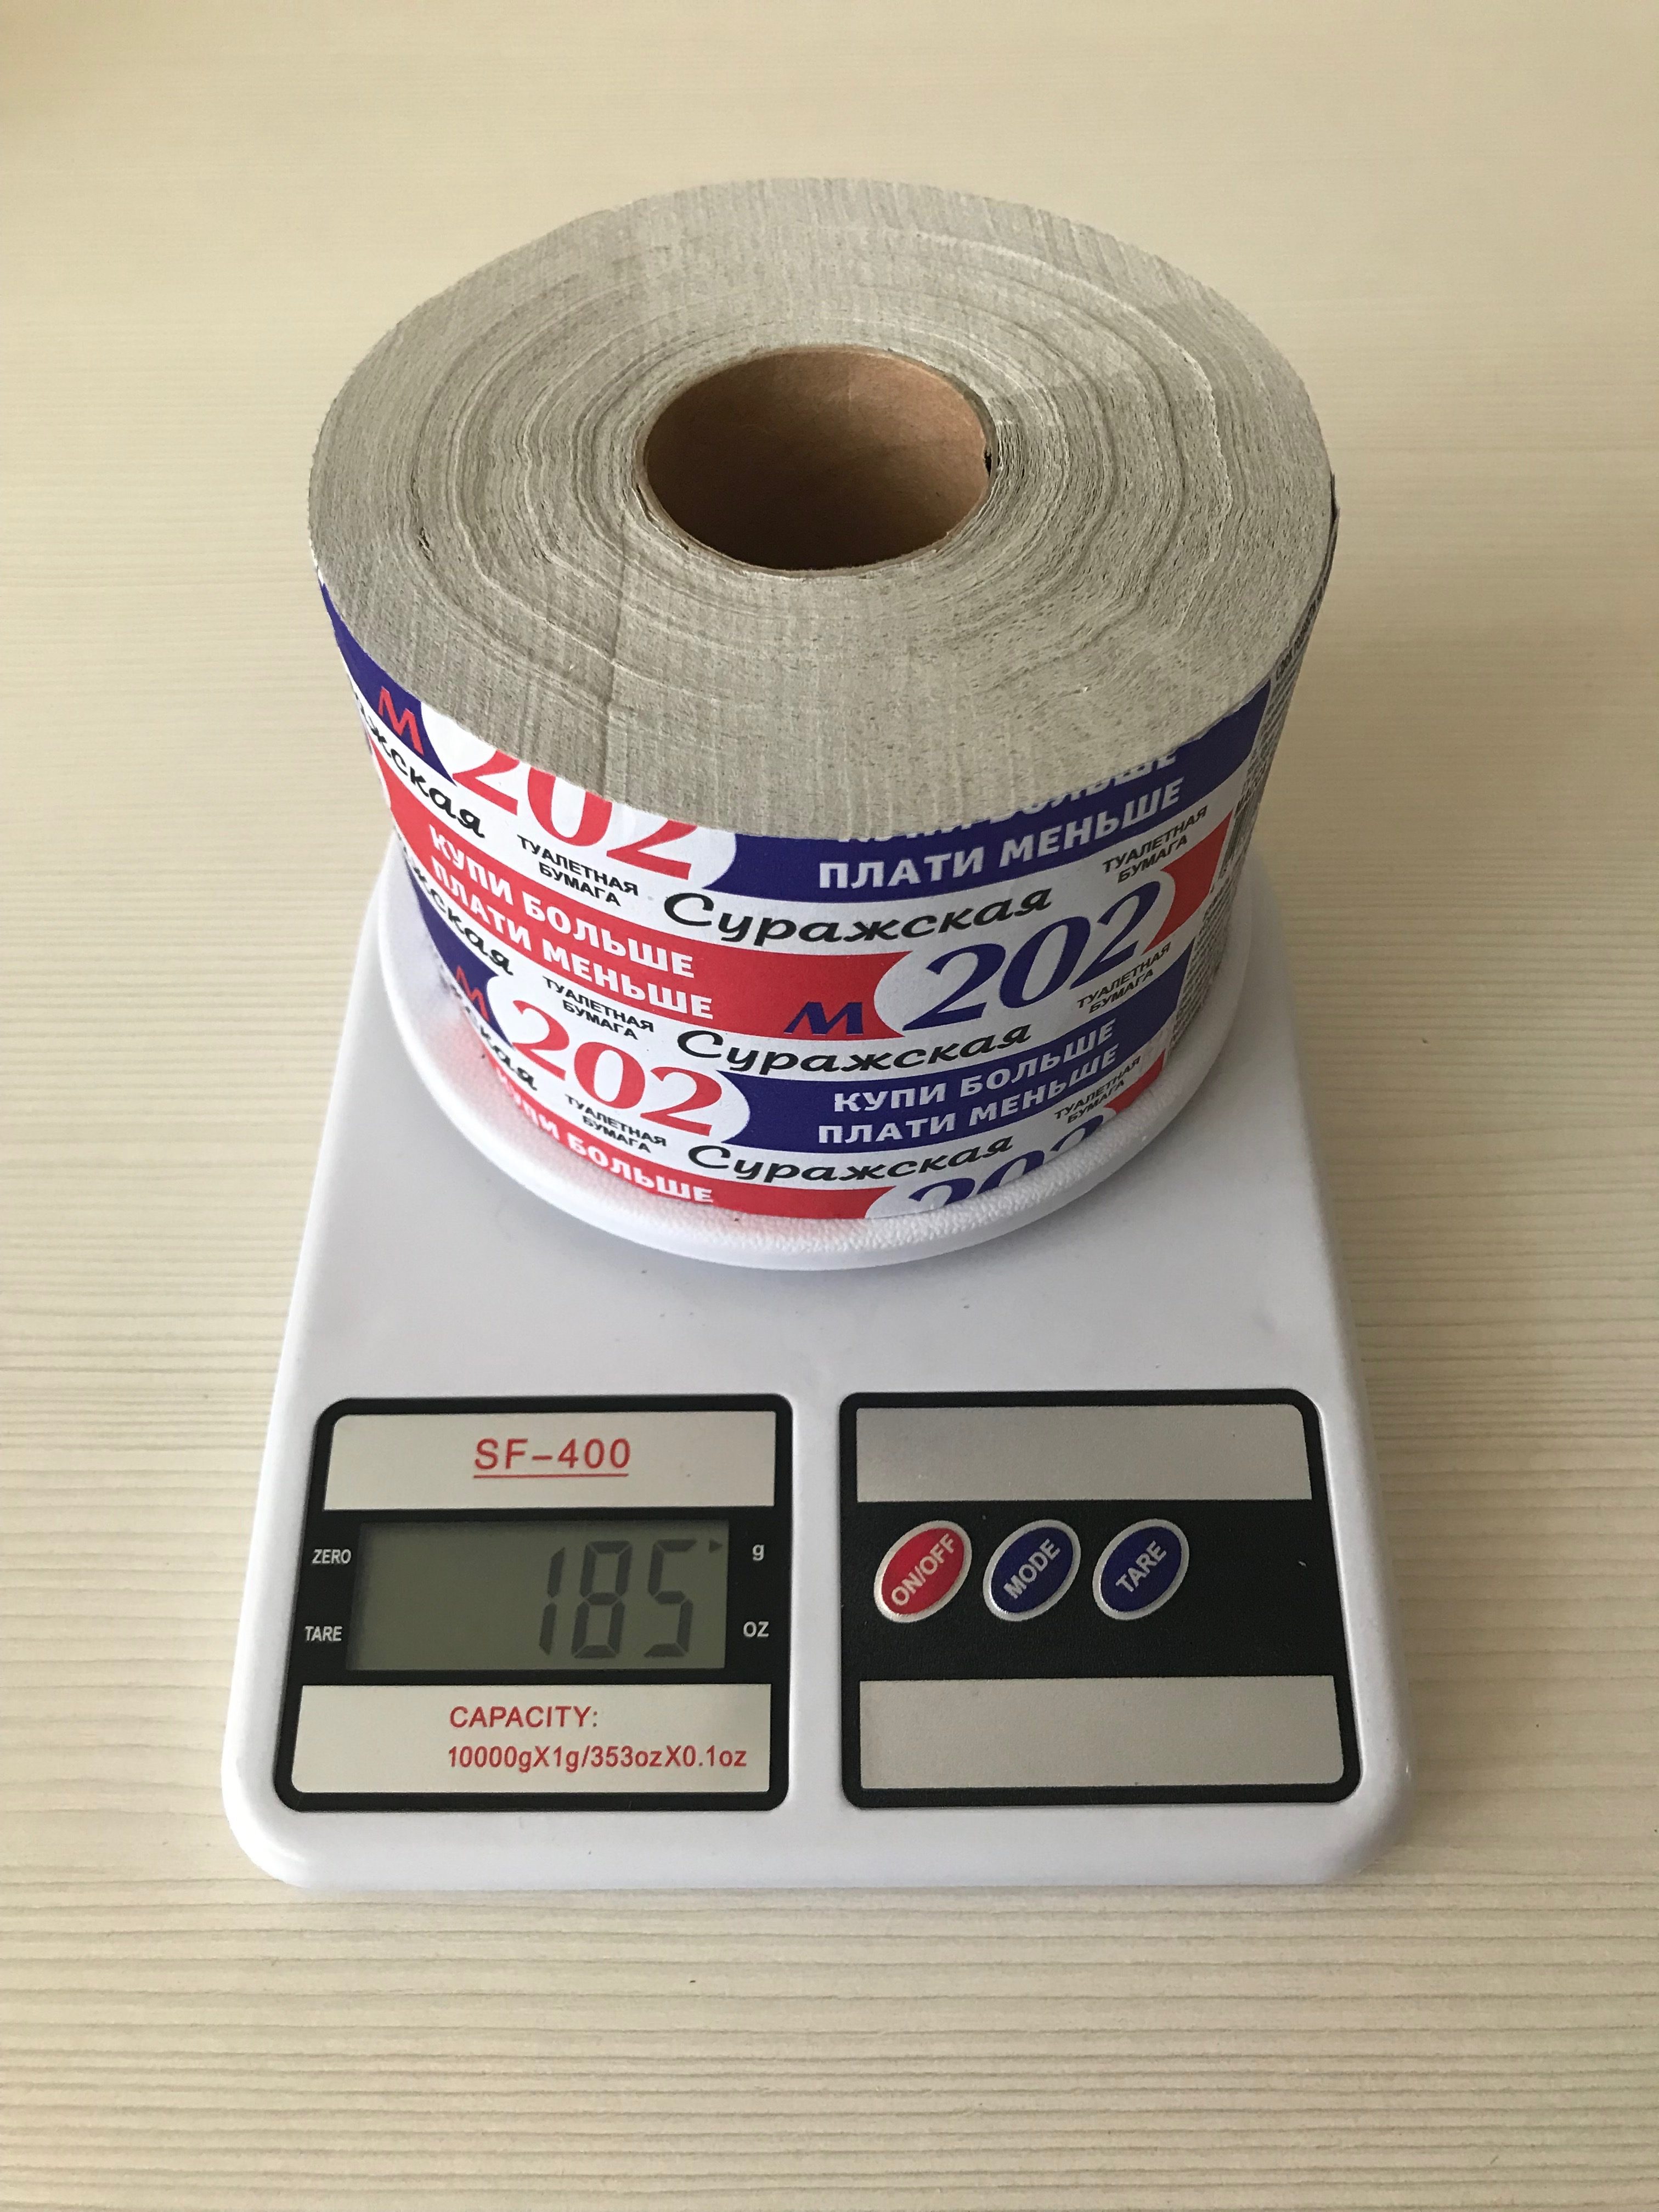 toilet paper roll weight